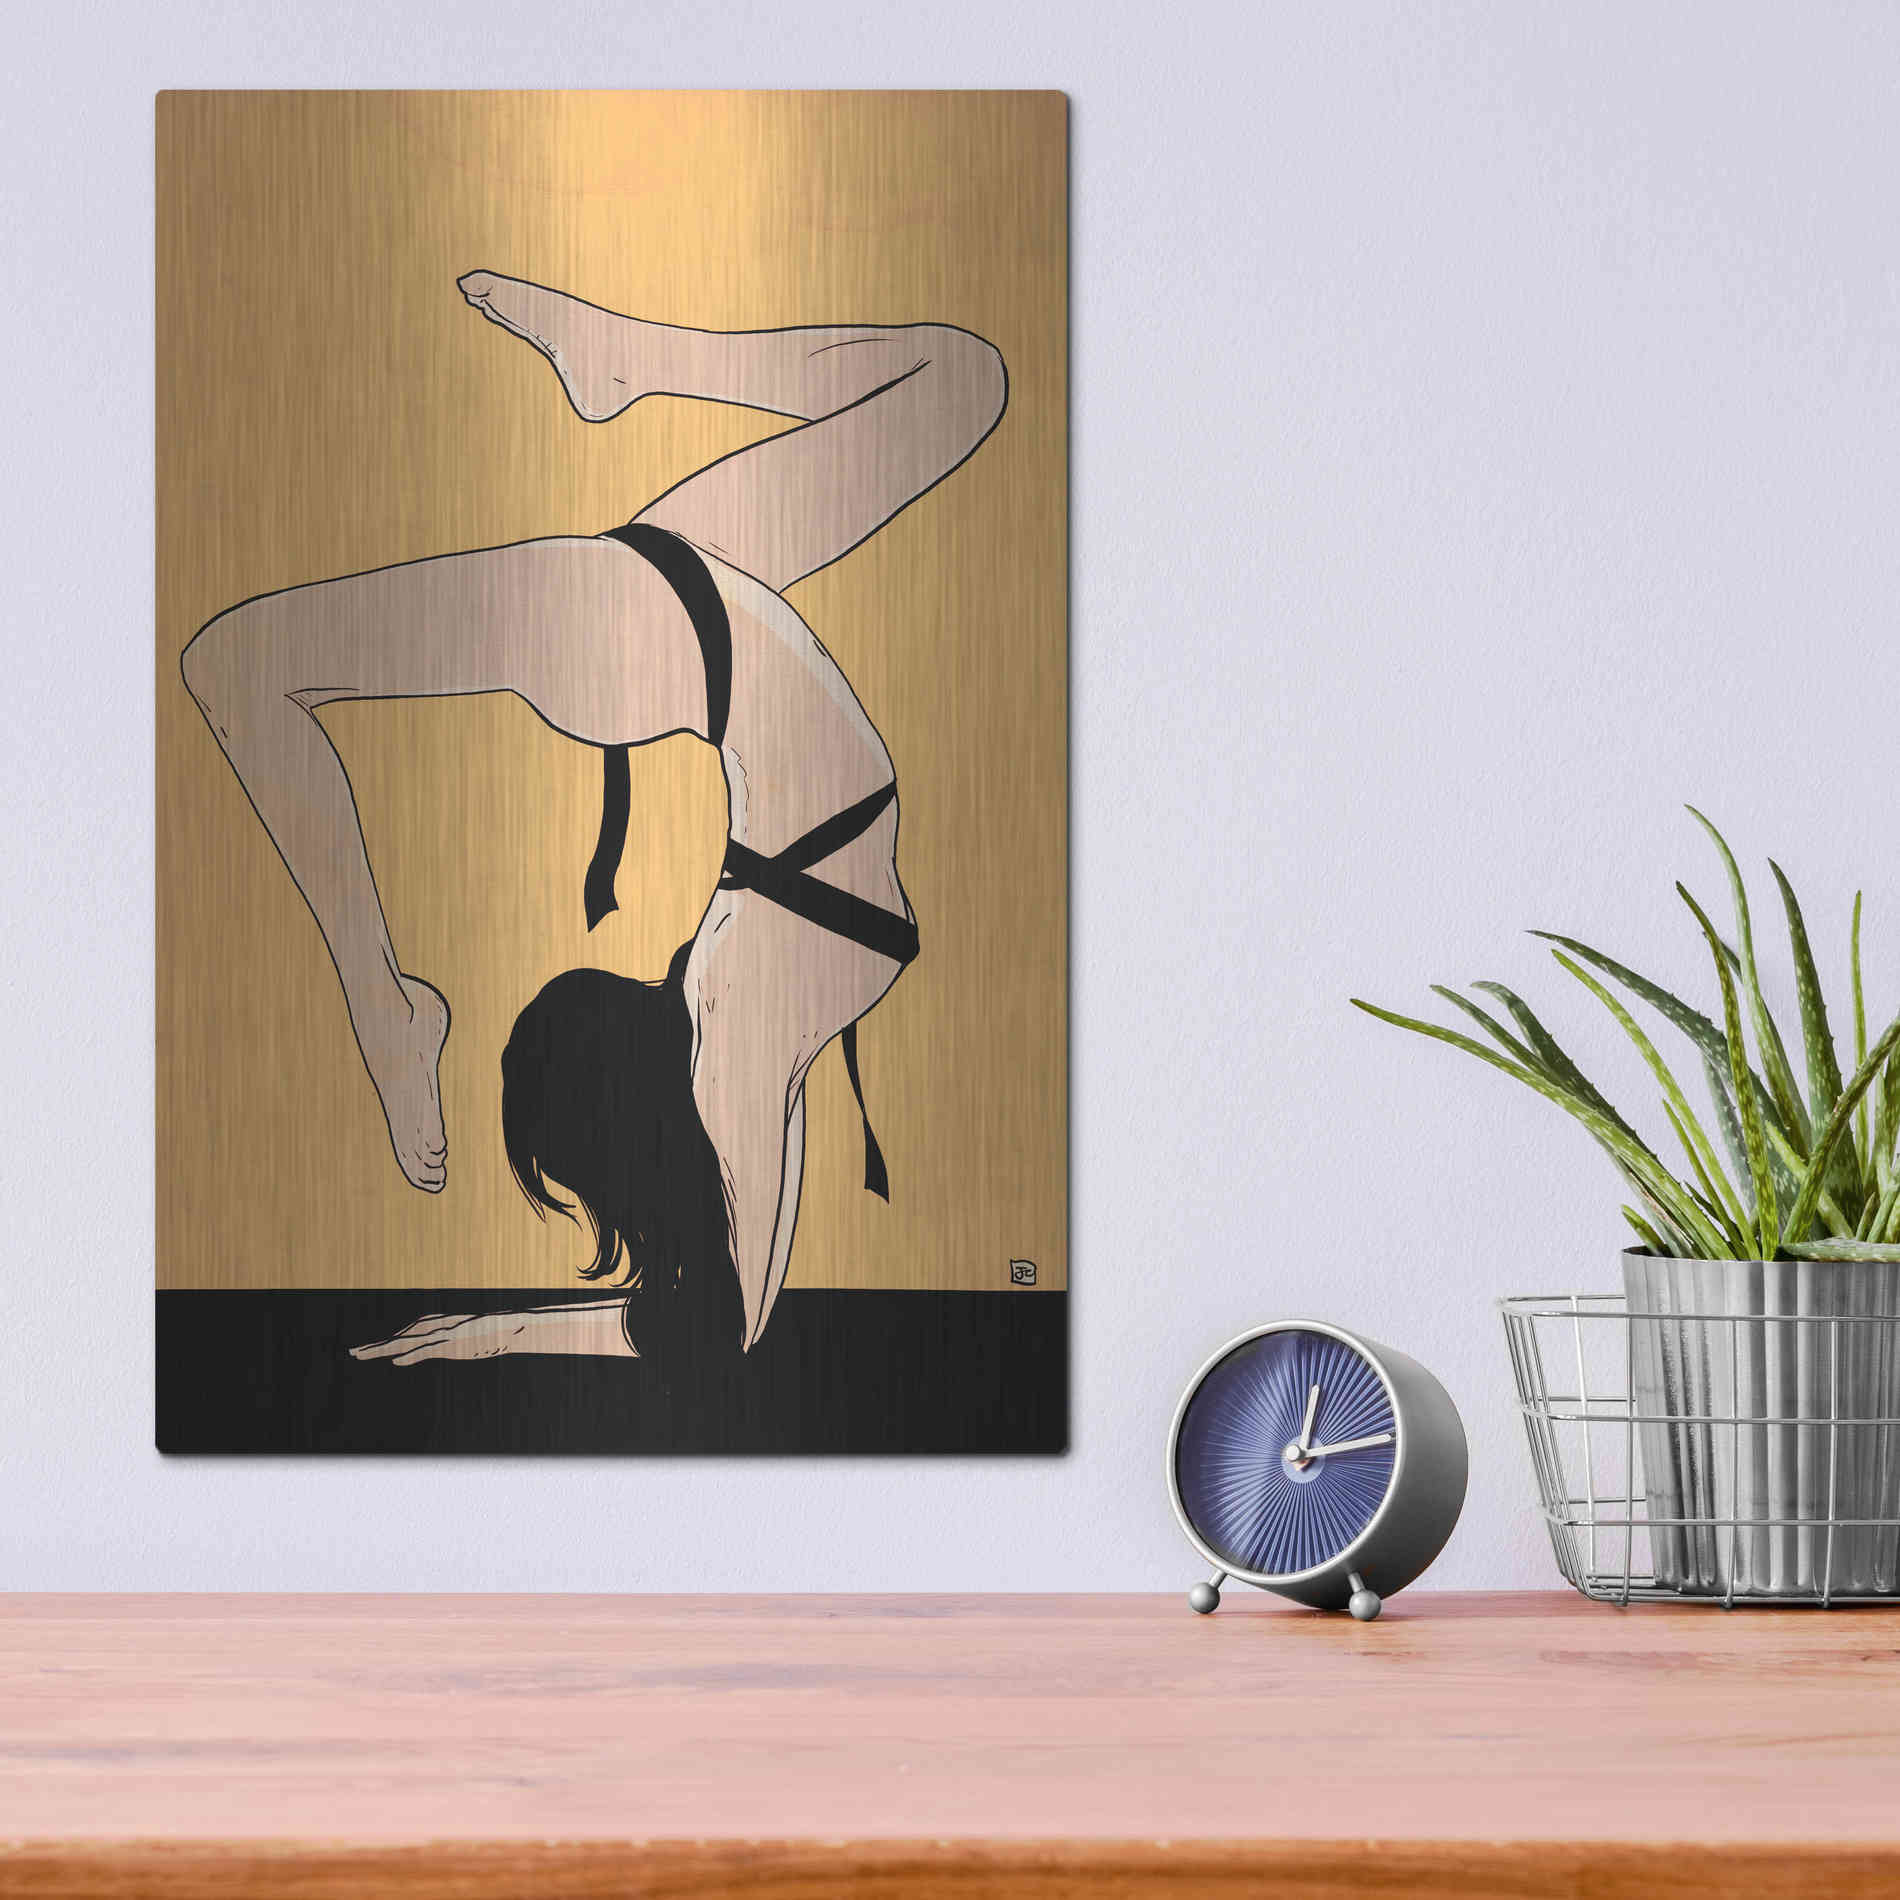 Luxe Metal Art 'Contortionist 2' by Giuseppe Cristiano, Metal Wall Art,12x16